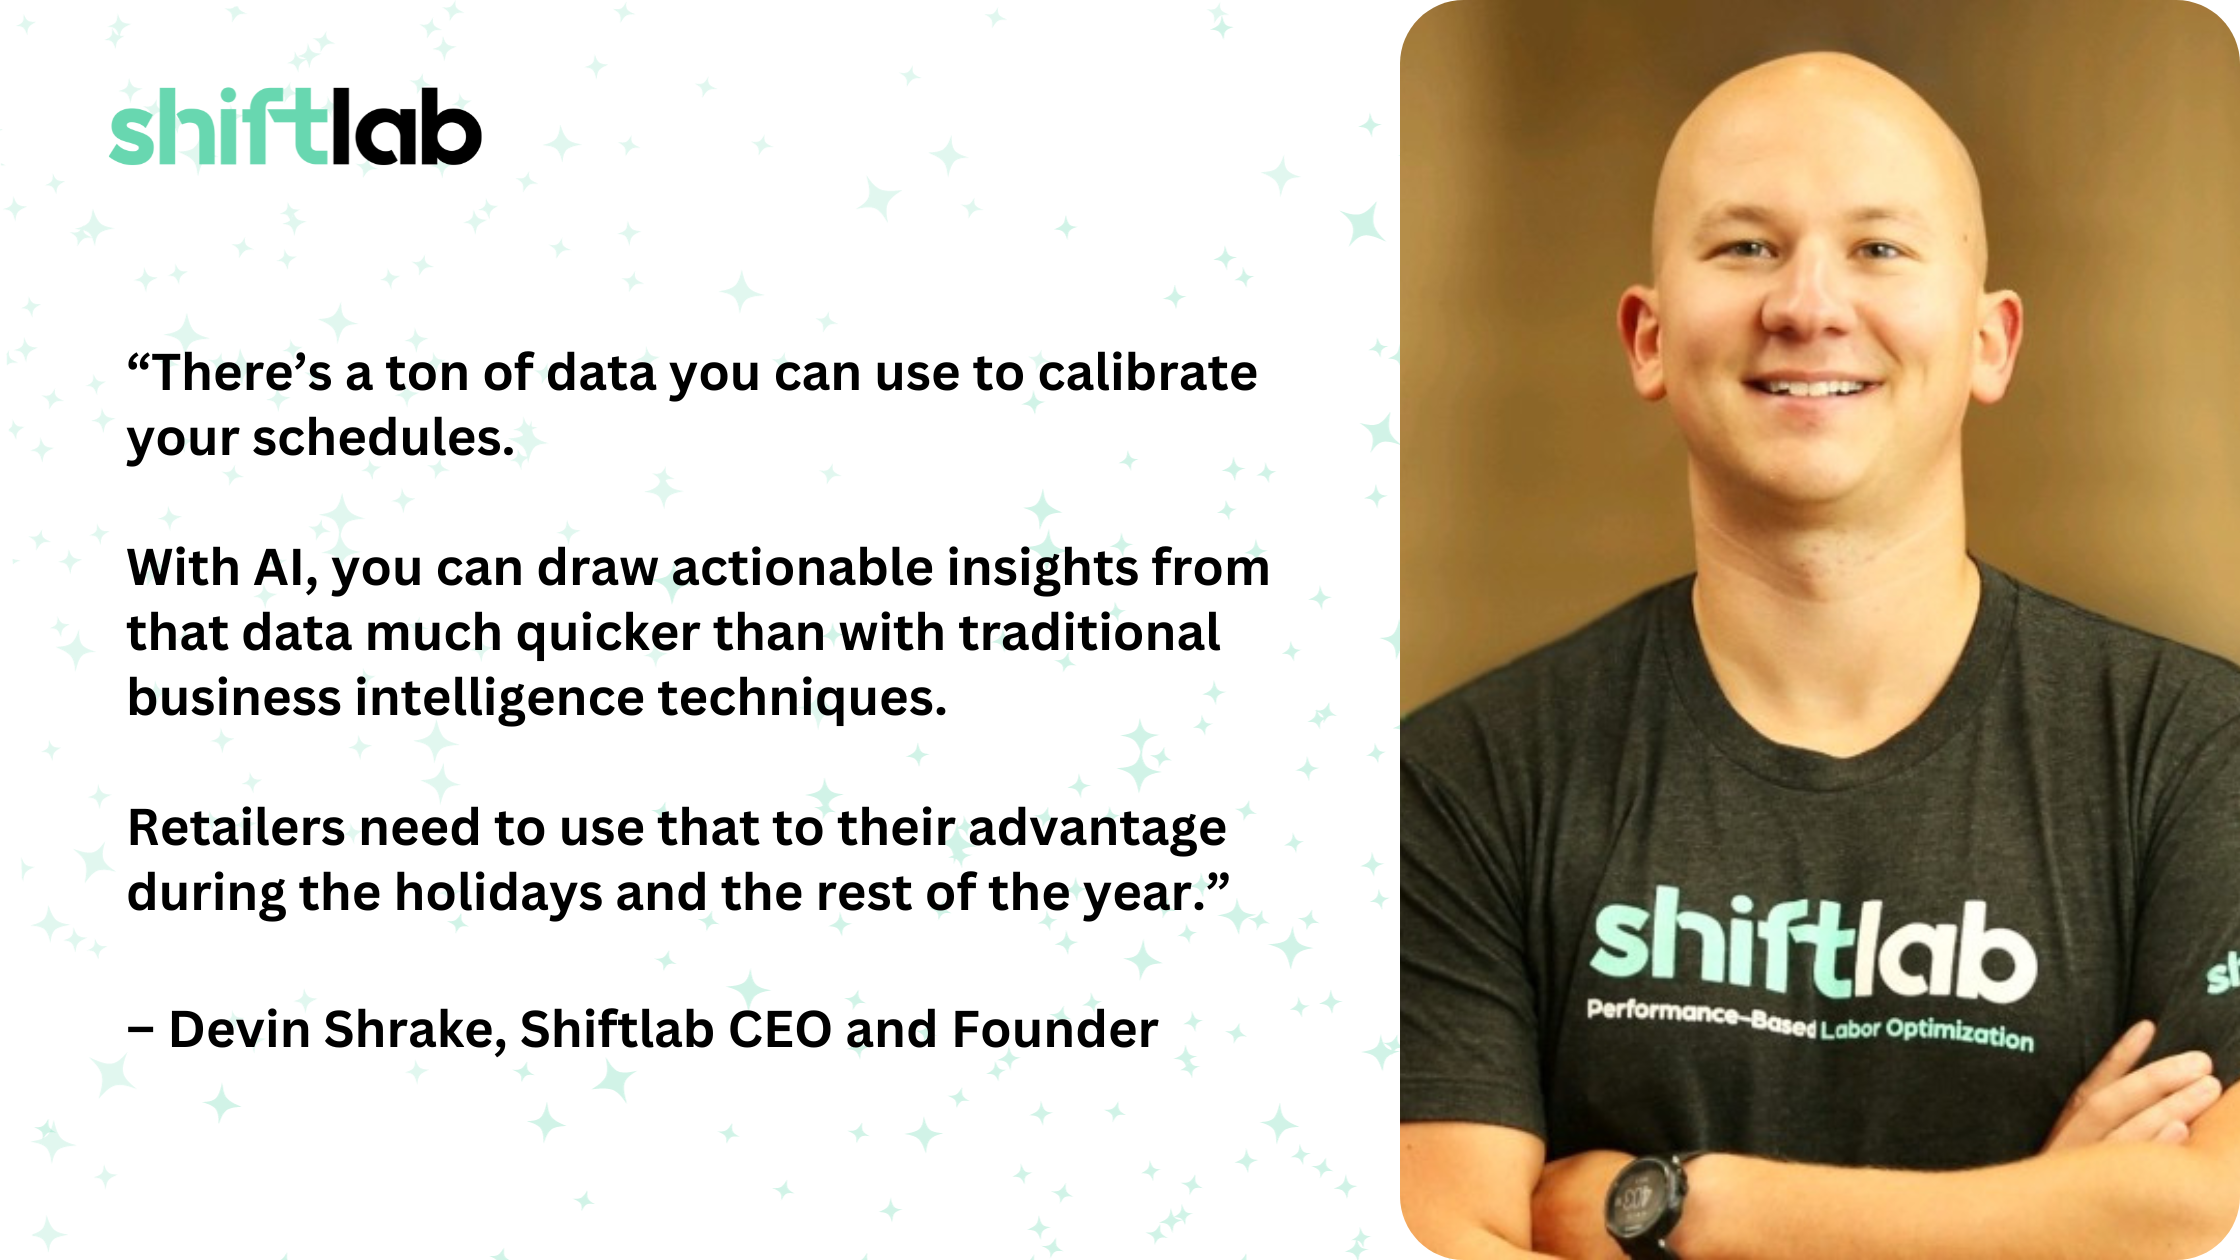 Quote from Shiftlab CEO Devin Shrake